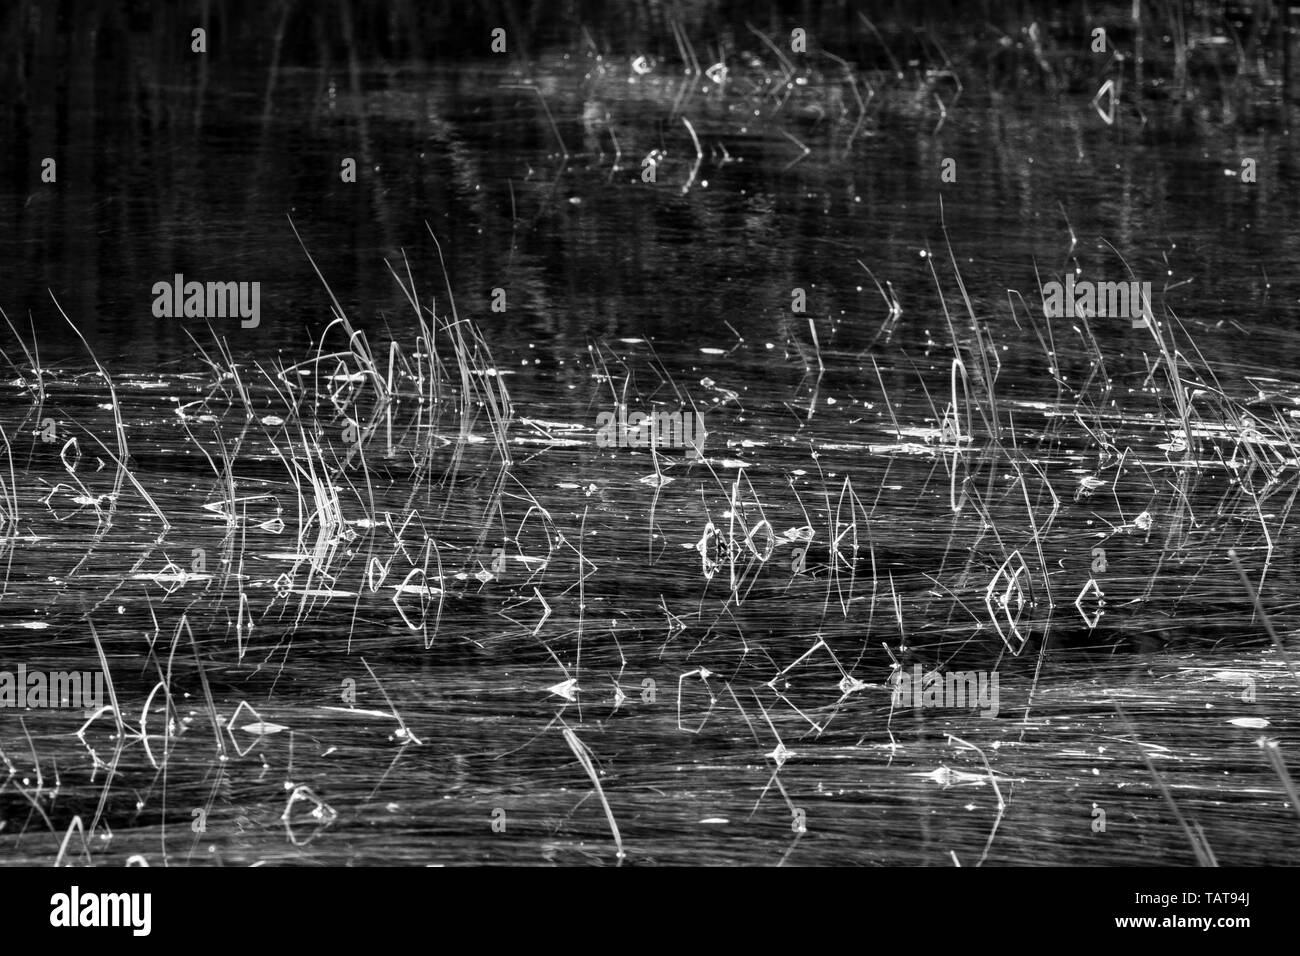 Grass, straw and thickets in water, blades of grass reflections in water. Abstract background. Swamp. Black and white. Monochrome. Stock Photo